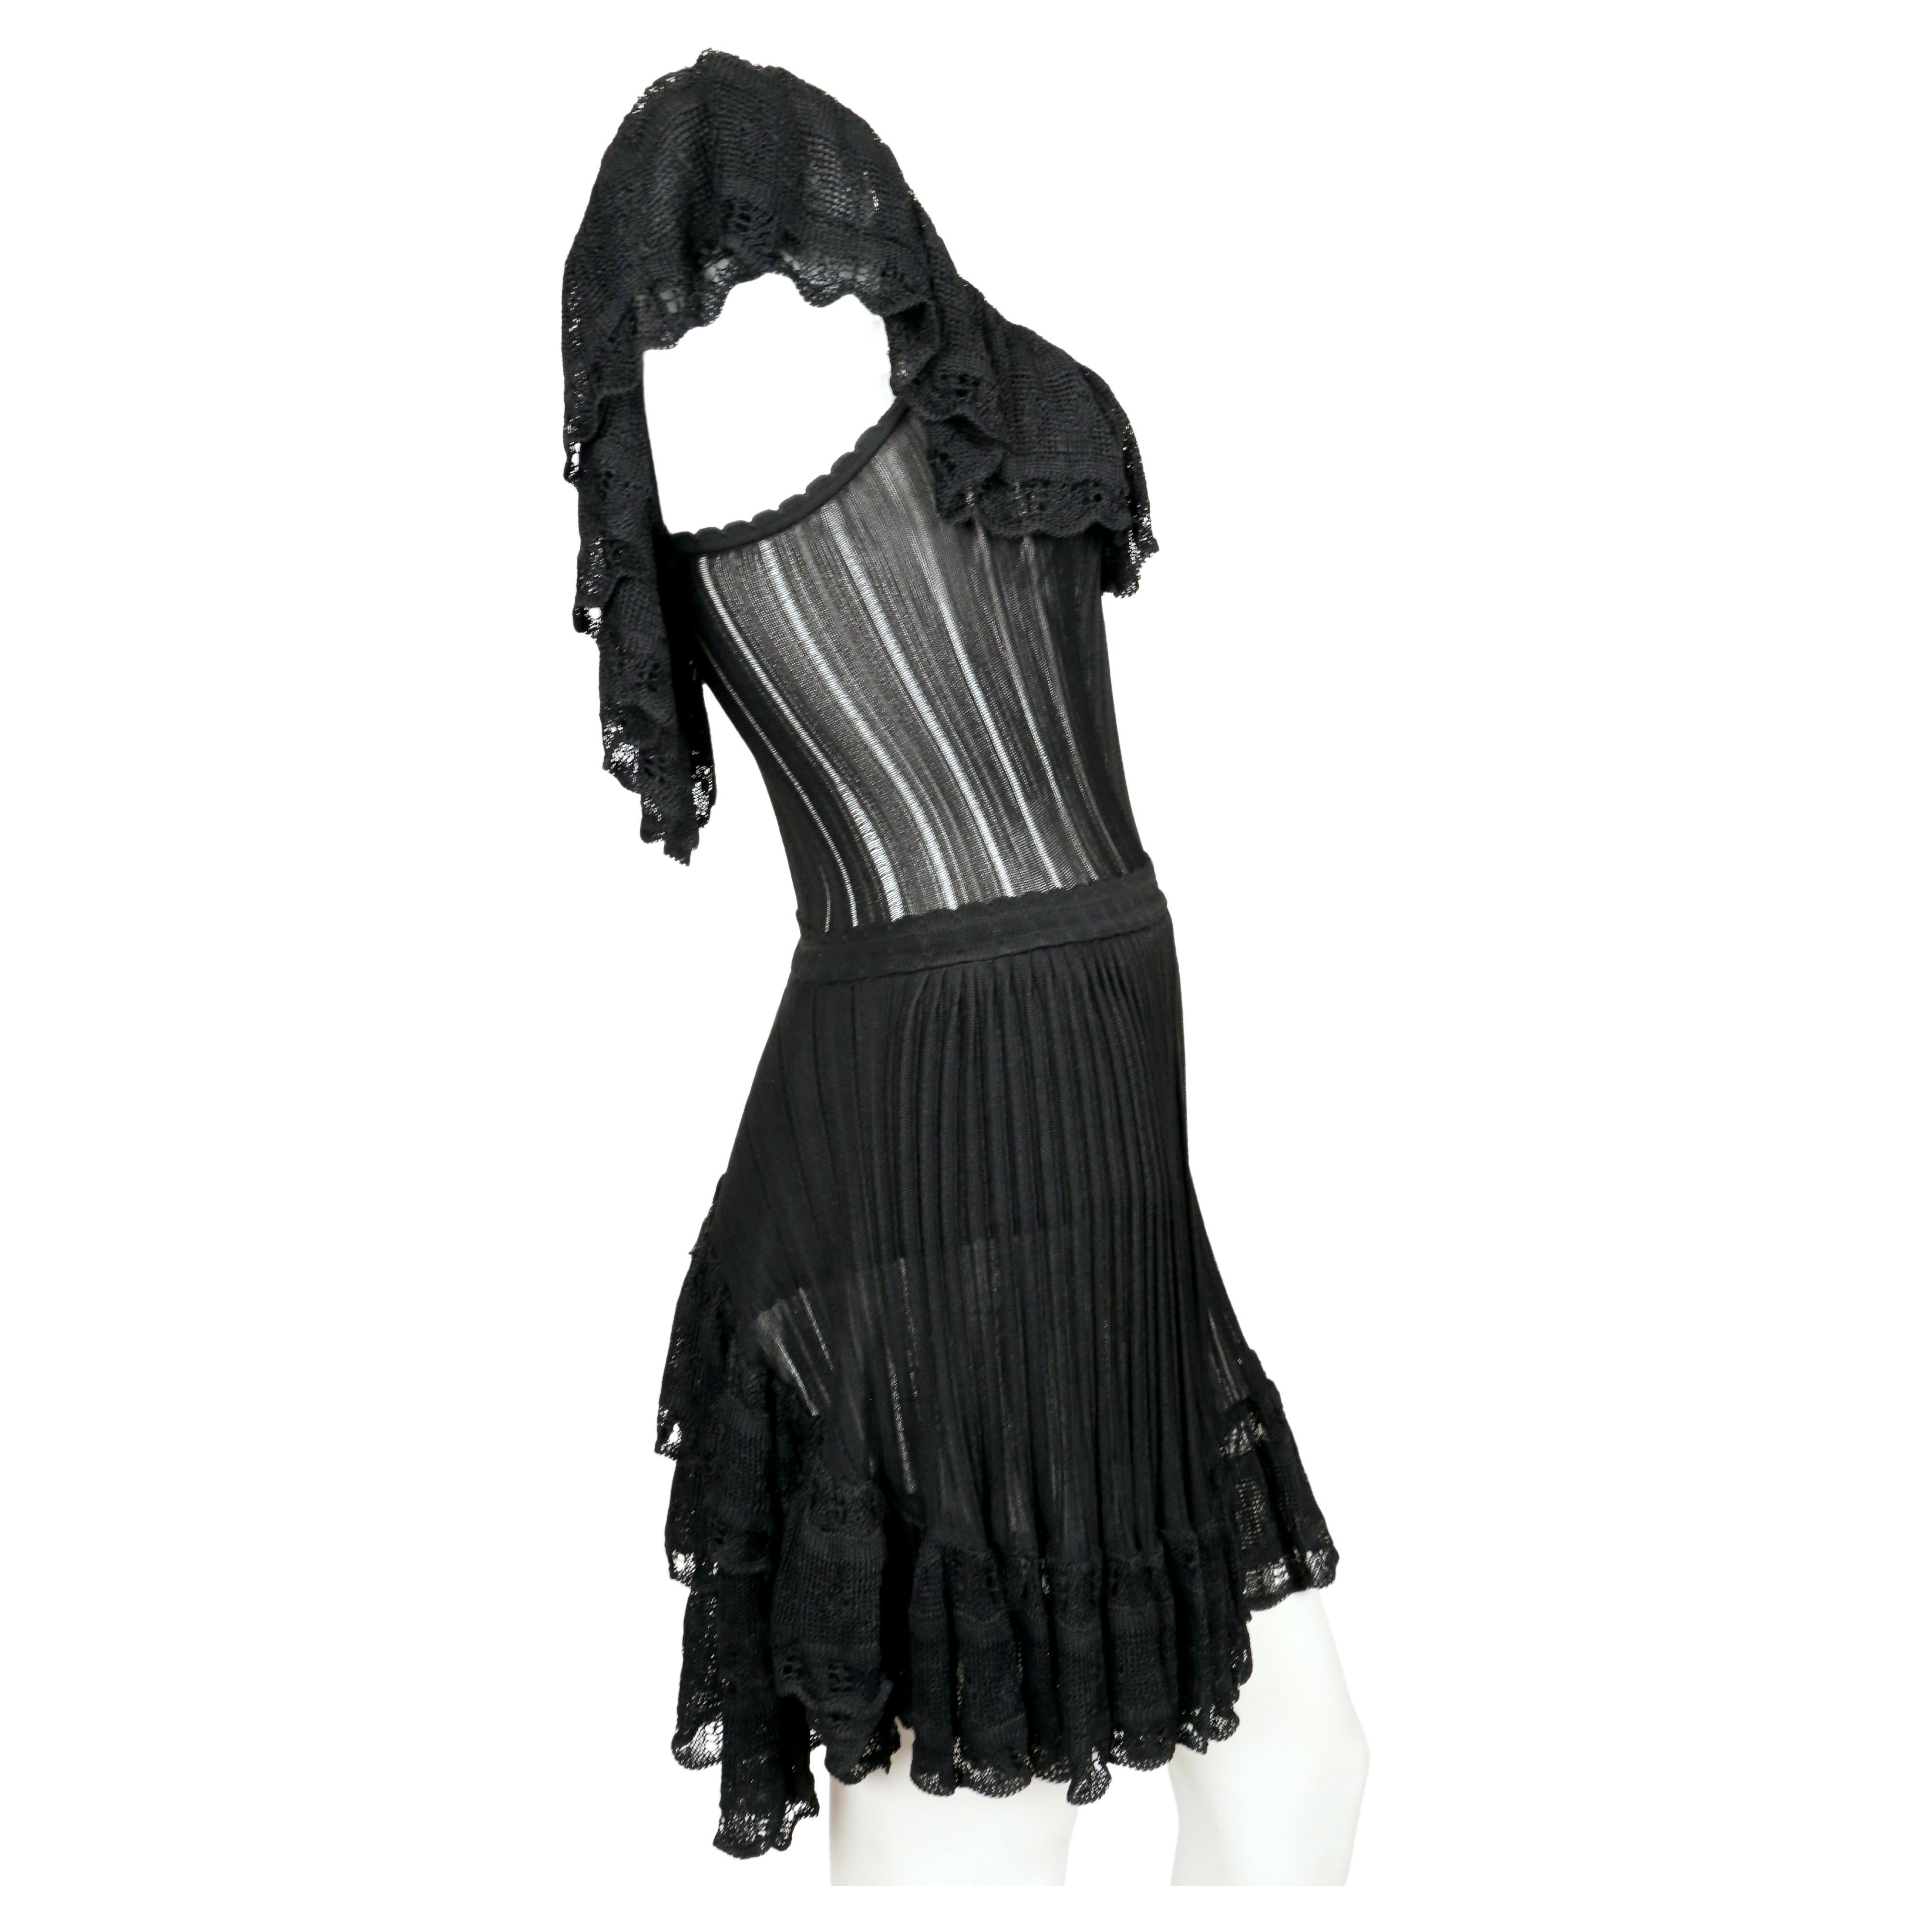  1992 AZZEDINE ALAIA black lace RUNWAY dress with bustle For Sale 2